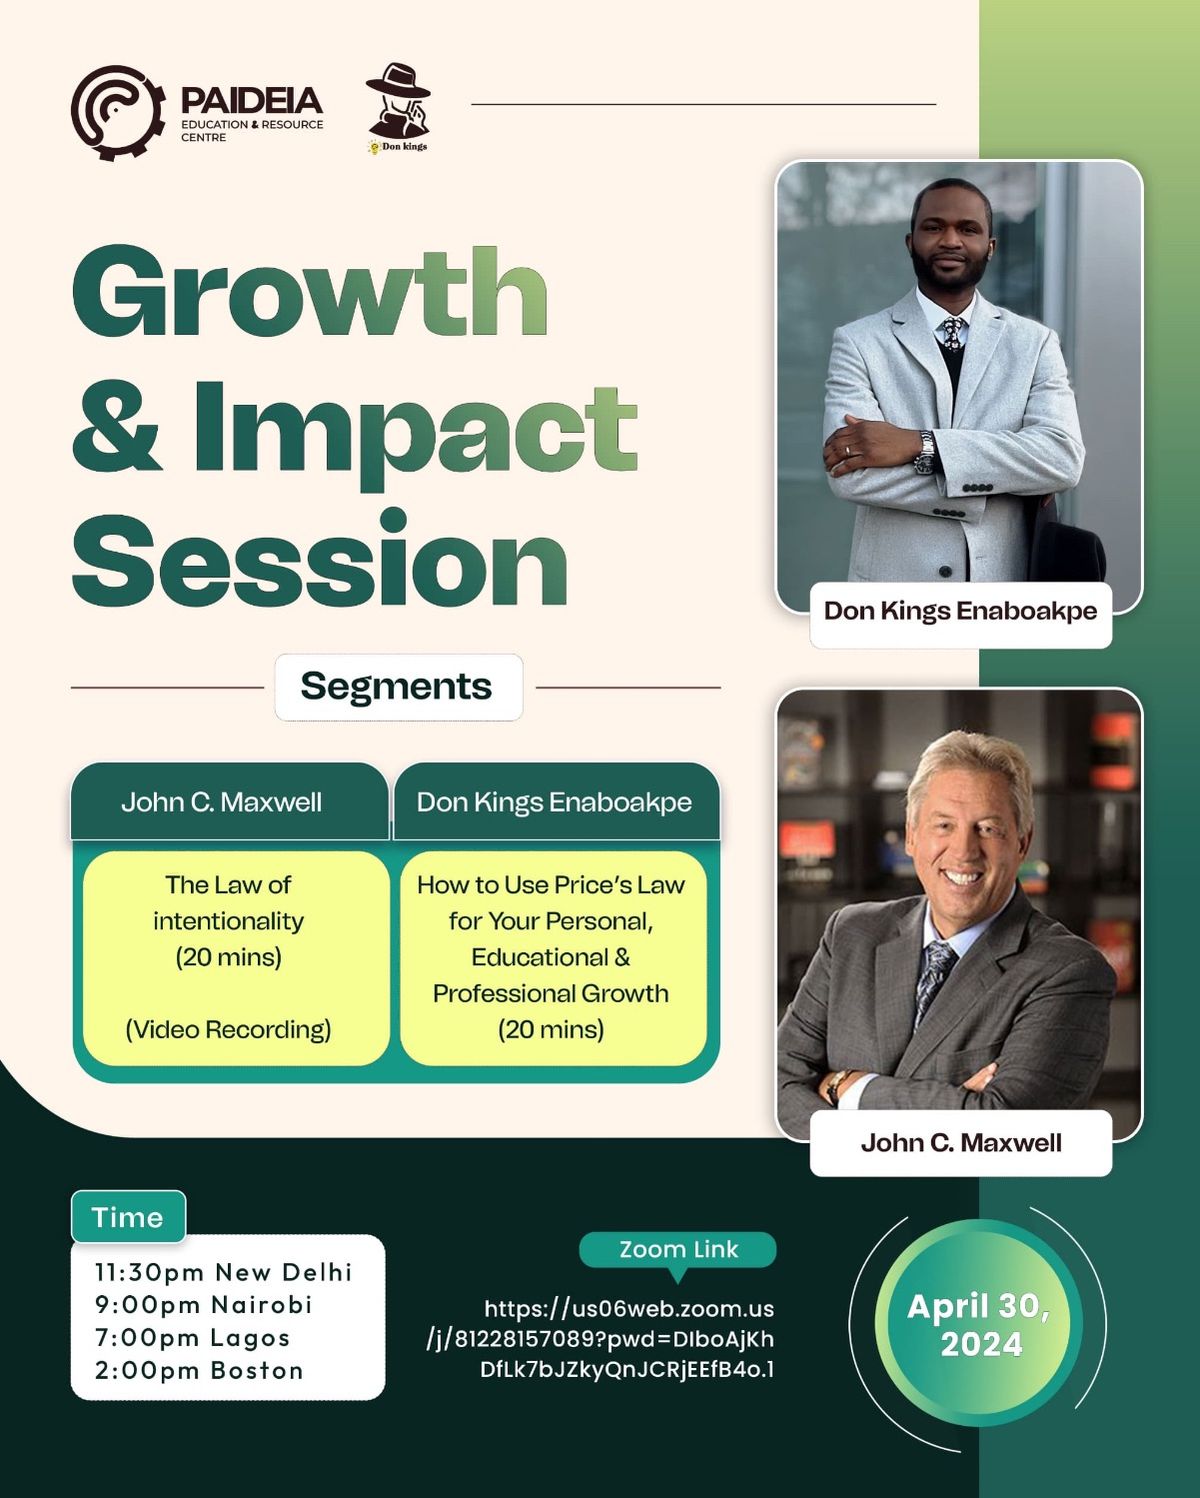 GROWTH & IMPACT SESSION